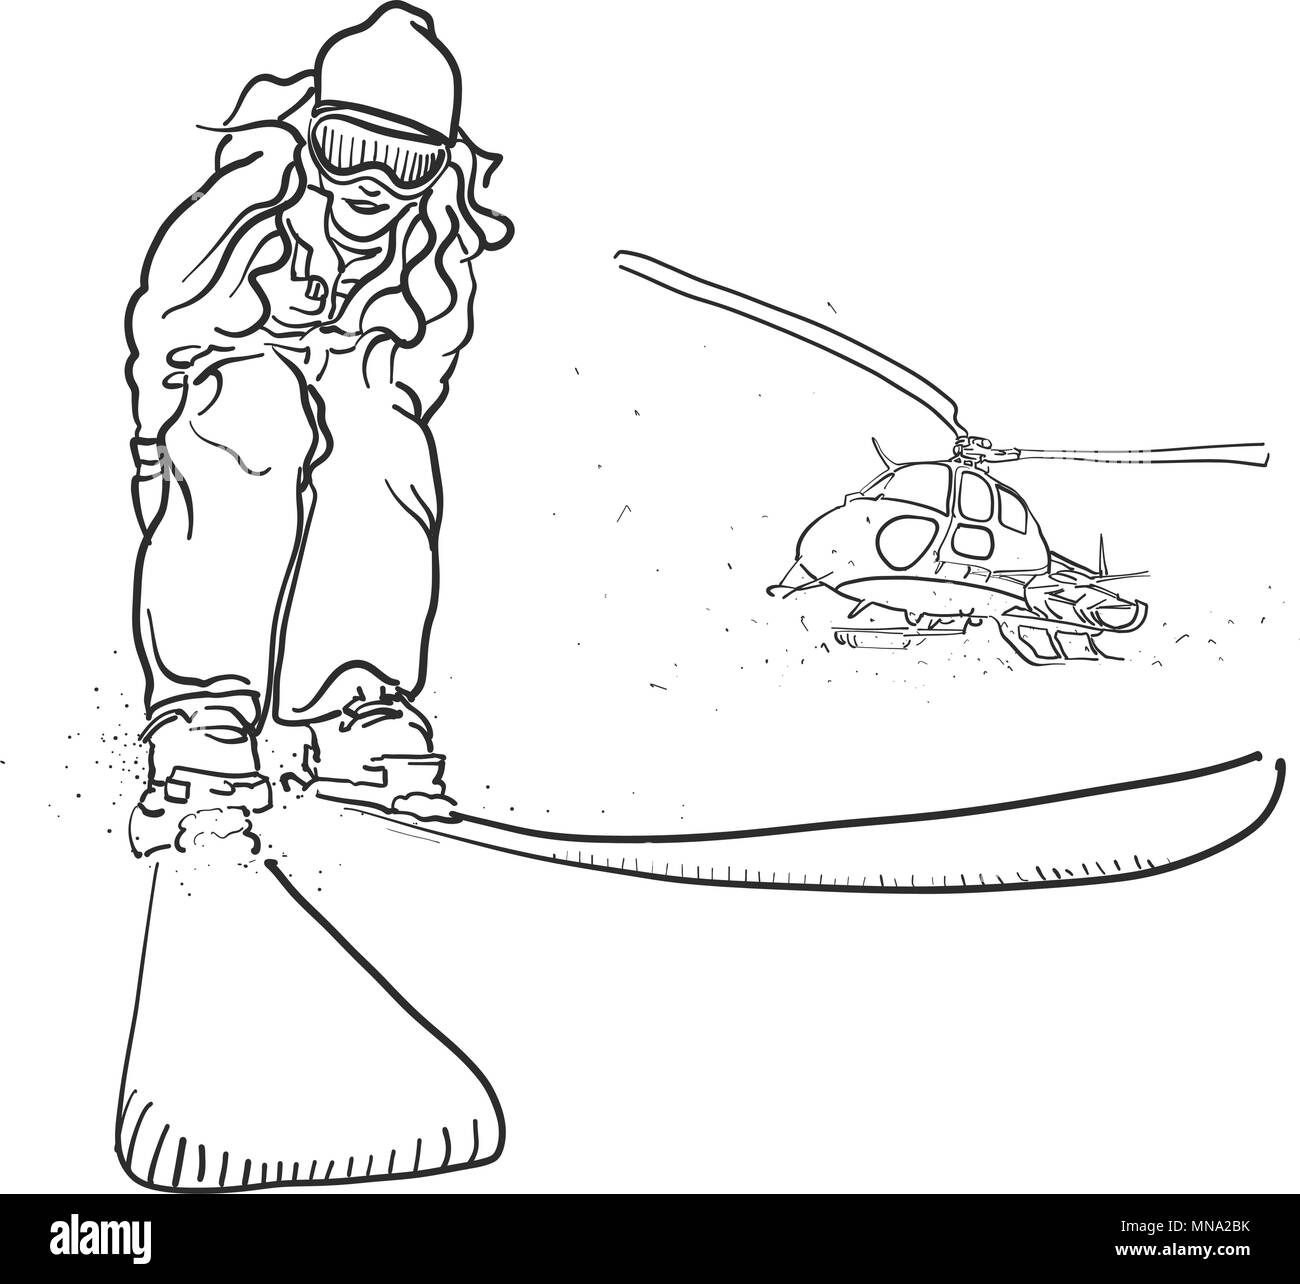 Skiing and Helicopter Doodle Sketches, Hand drawn Vector Outline Artwork Stock Vector